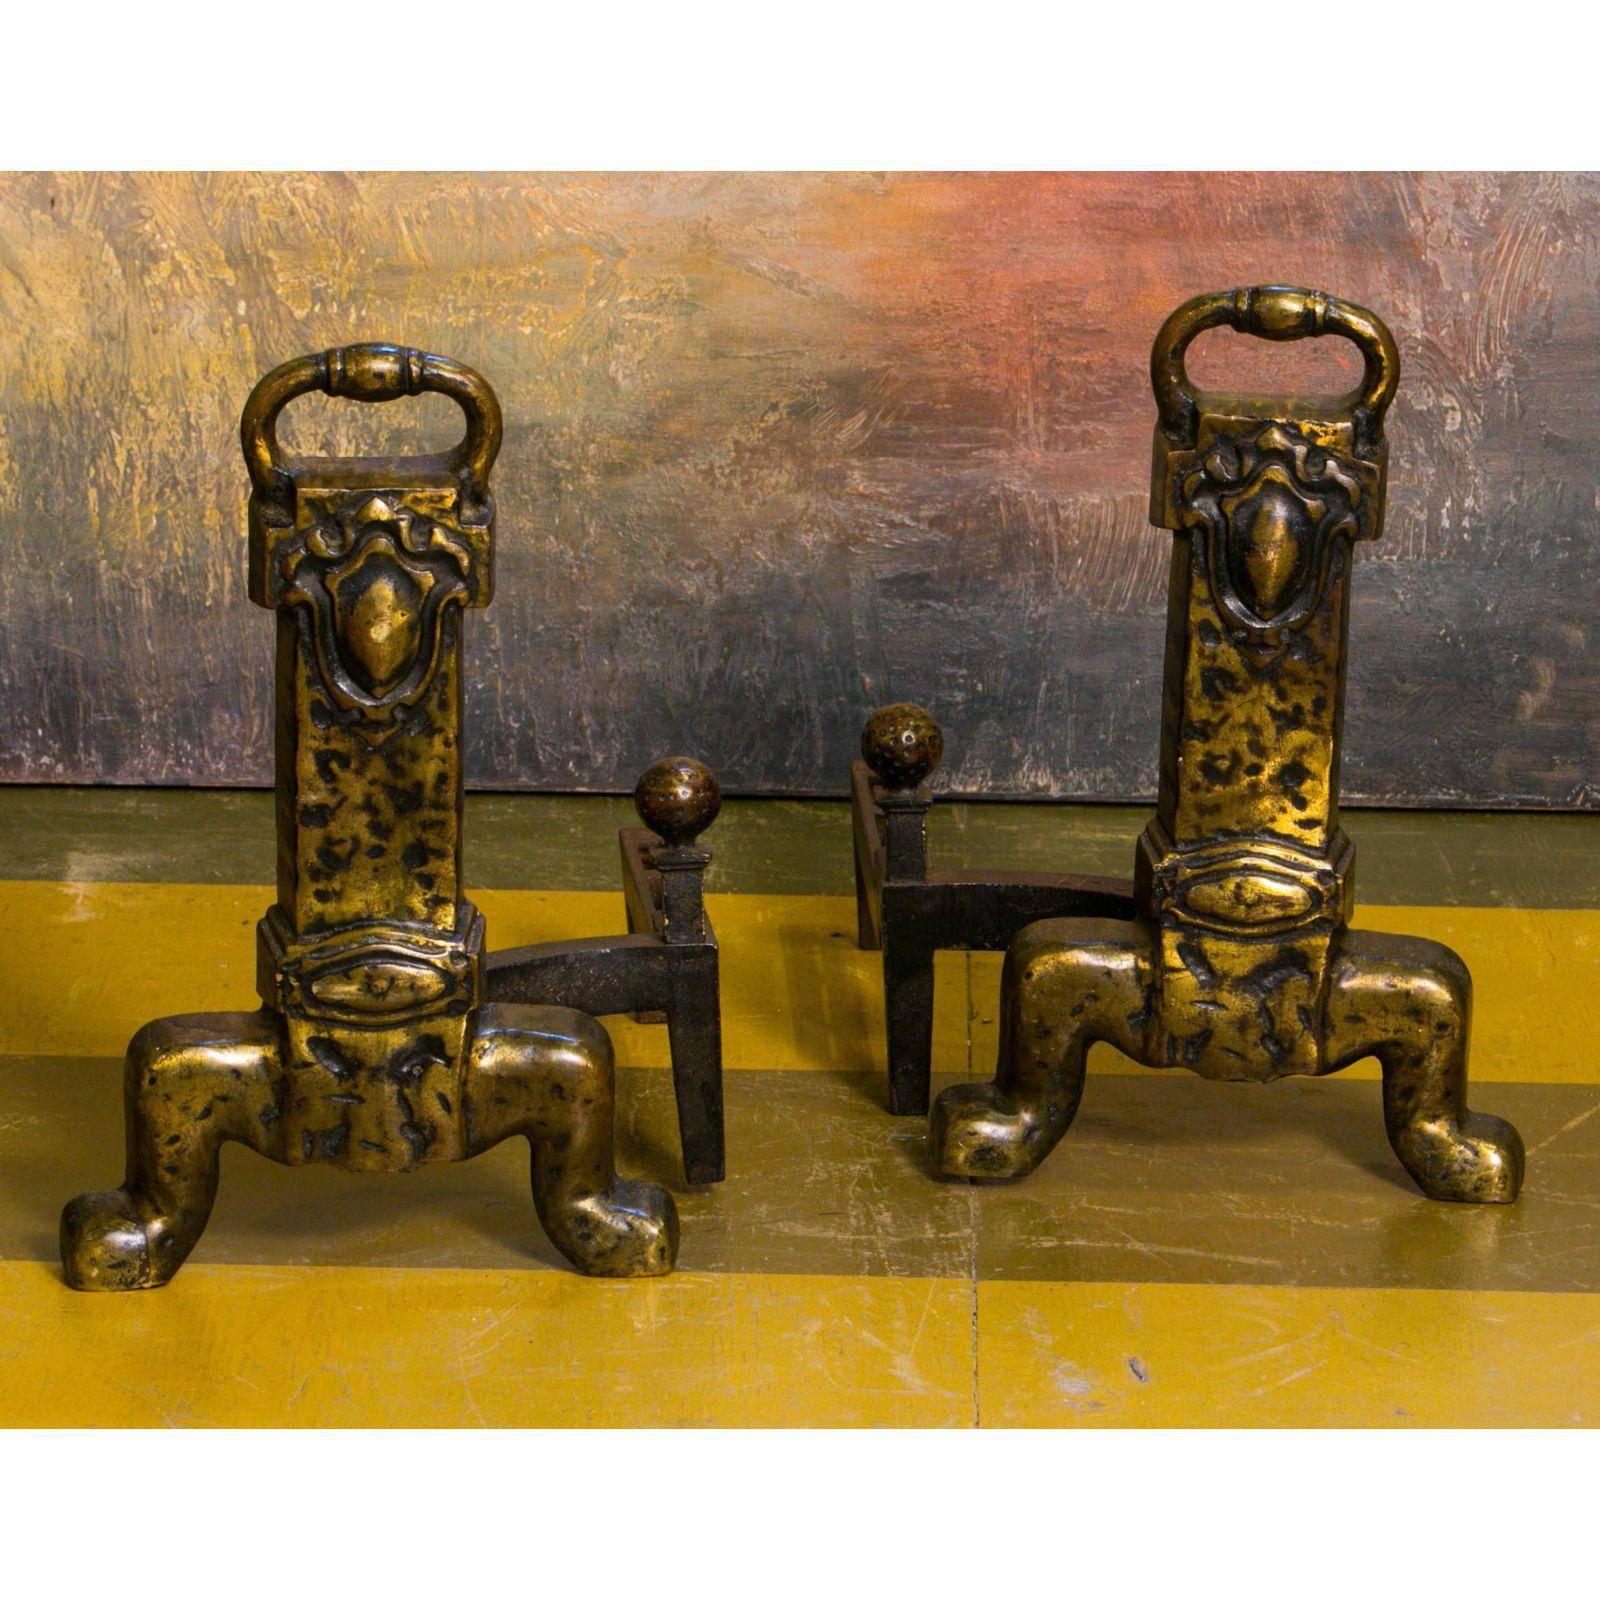 Cast Pair English Arts & Crafts-Style Hammered Bronze Andirons circa 1930 For Sale